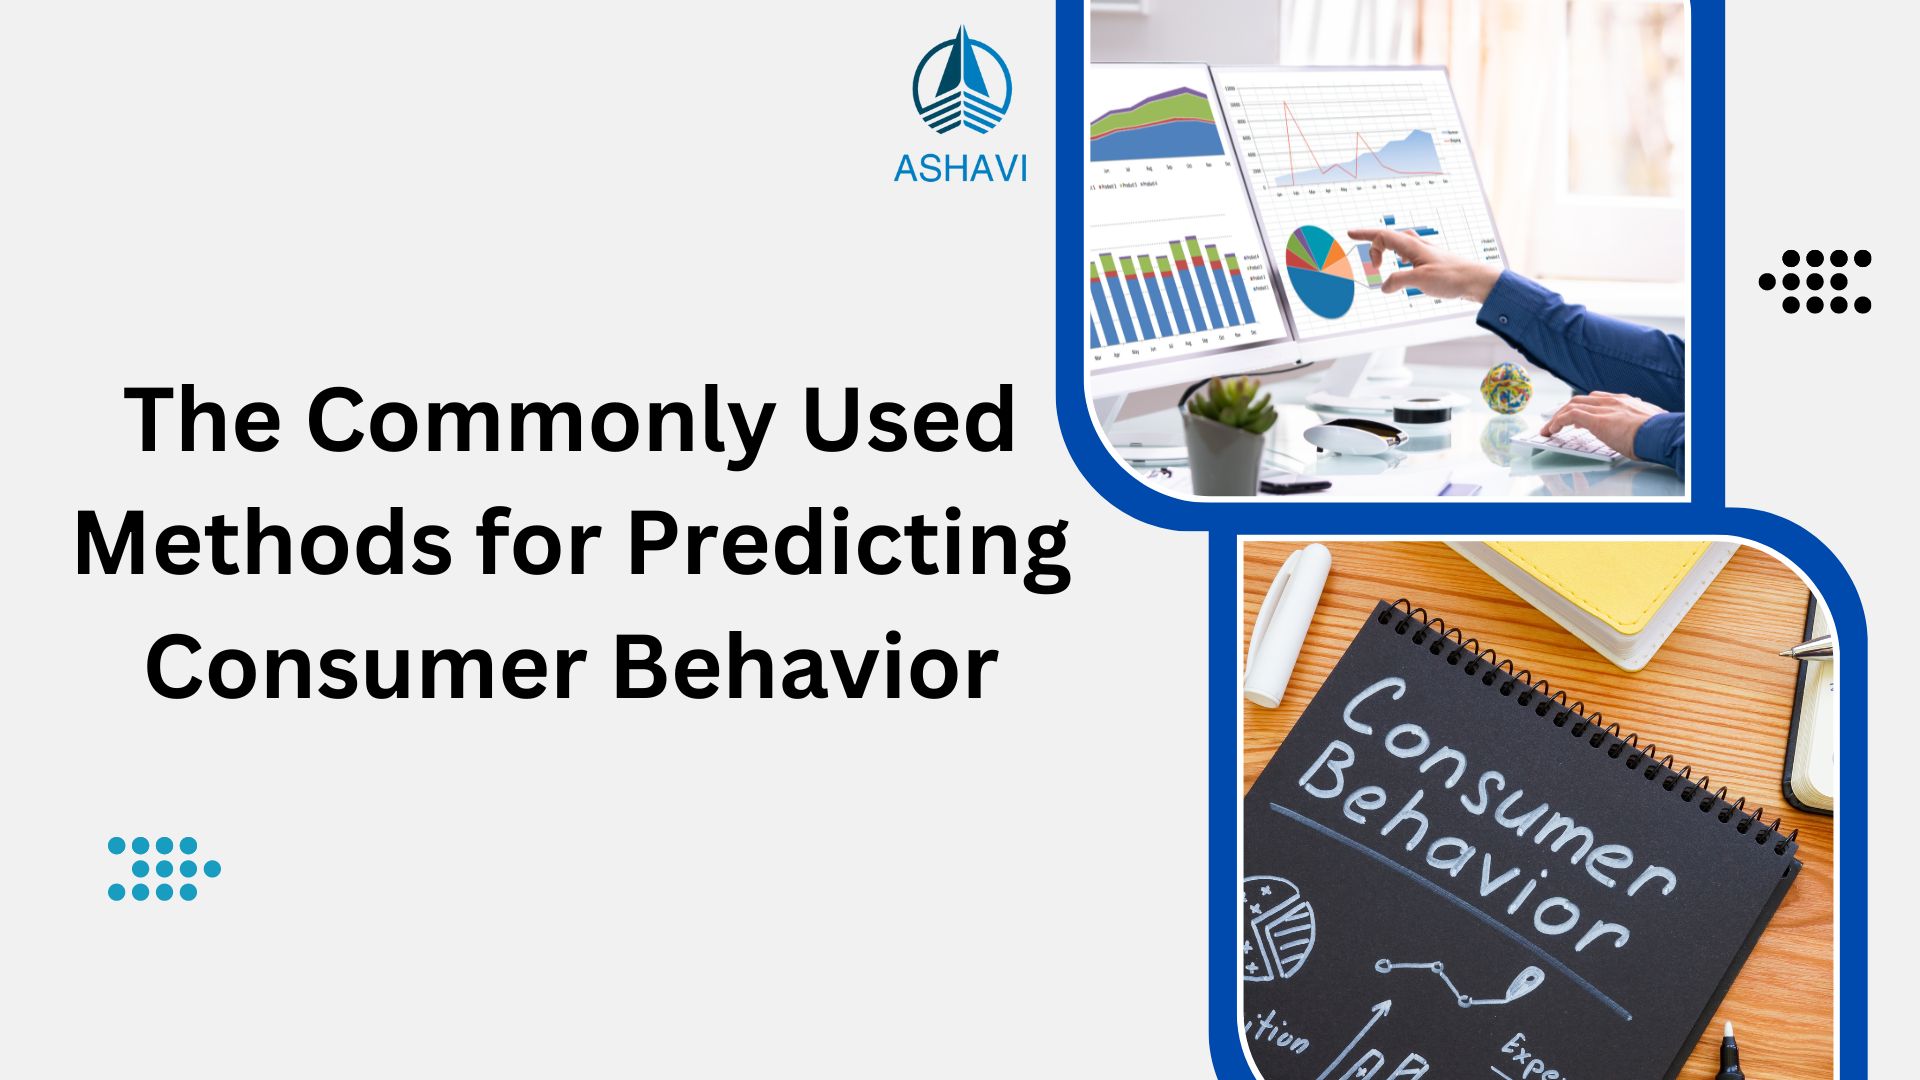 The Commonly Used Methods for Predicting Consumer Behavior